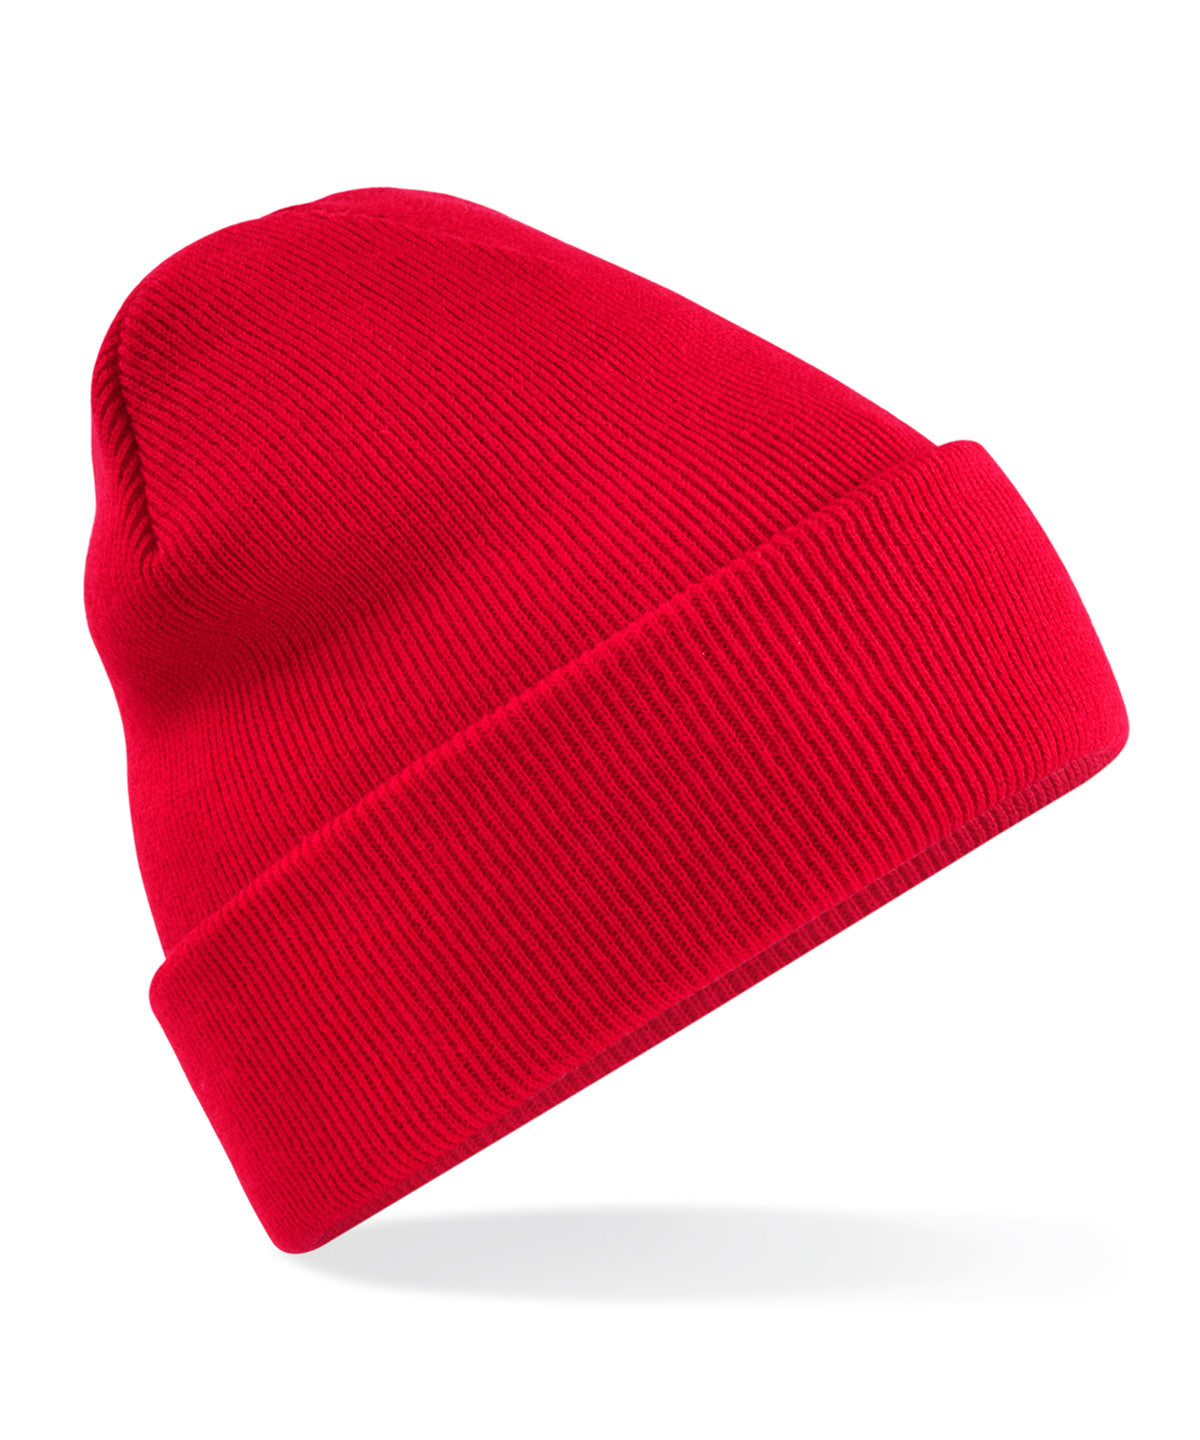 Personalised Hats - Mid Red Beechfield Recycled original cuffed beanie